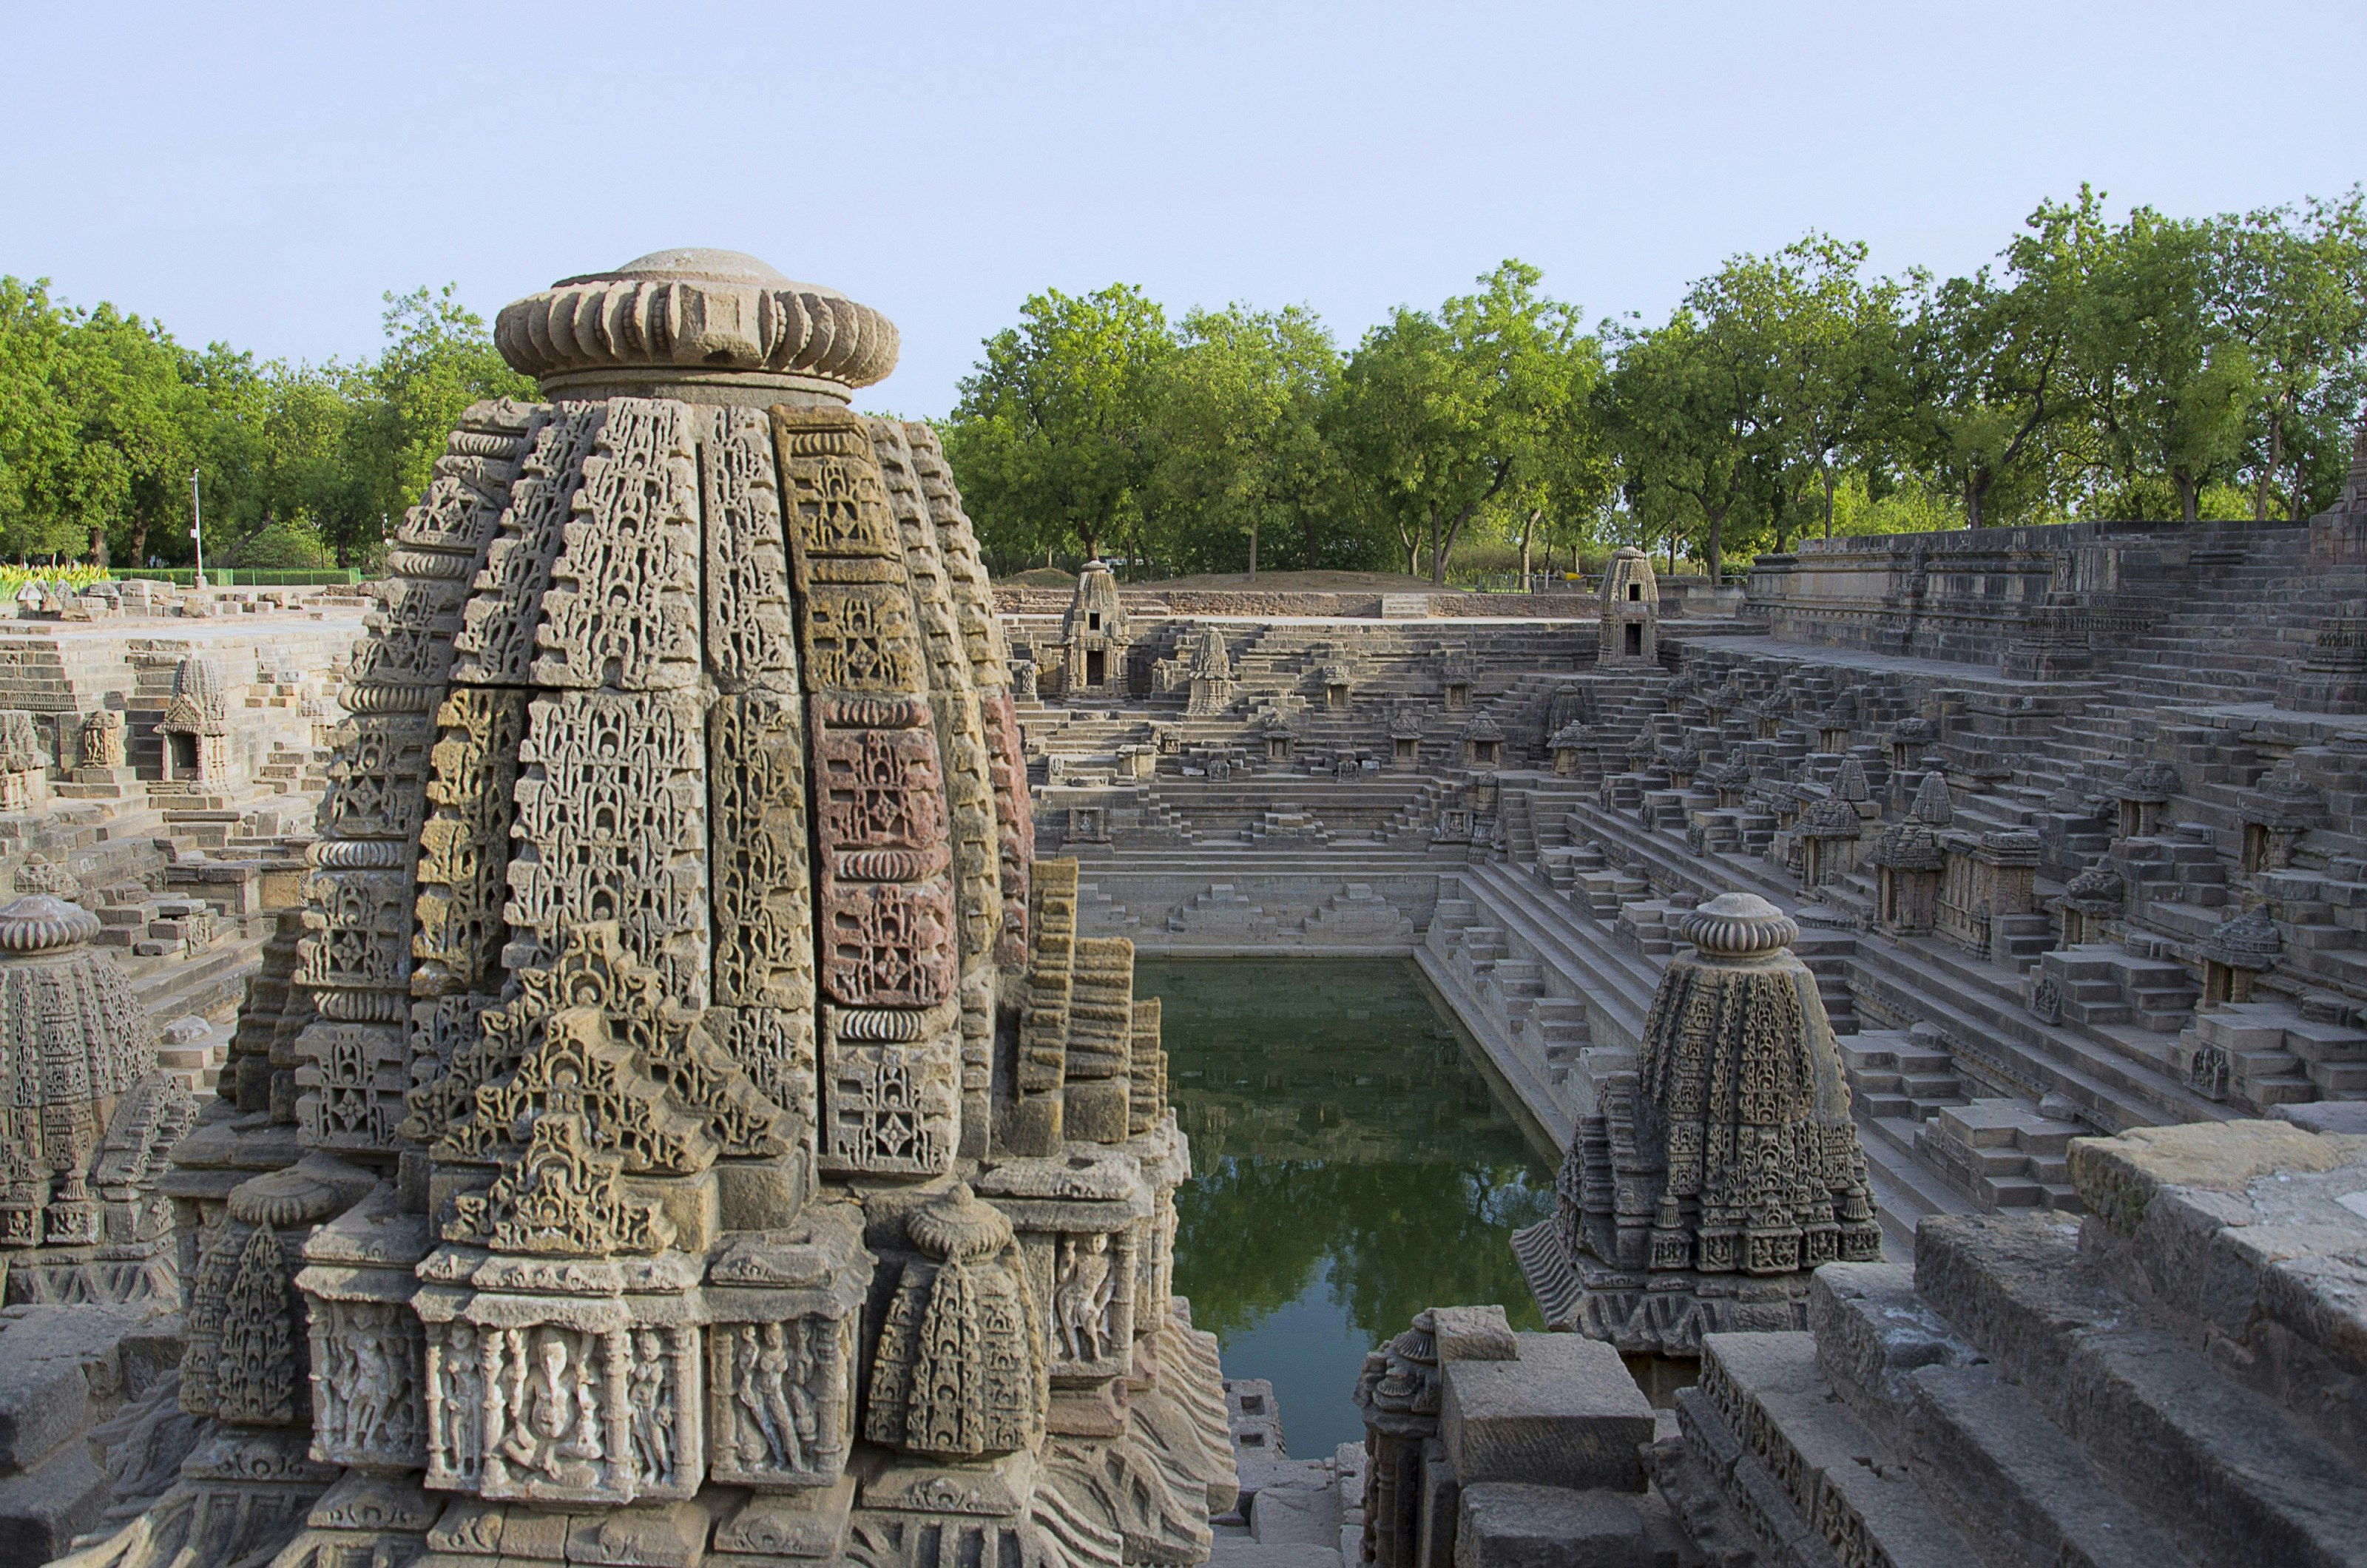 A view over the Surya Kund stepwell in Gujarat, with a close-up view of one of the small shrines dominating the image, and the large well, with the diagonal steps, visible behind it. In the background trees and other greenery are visible.